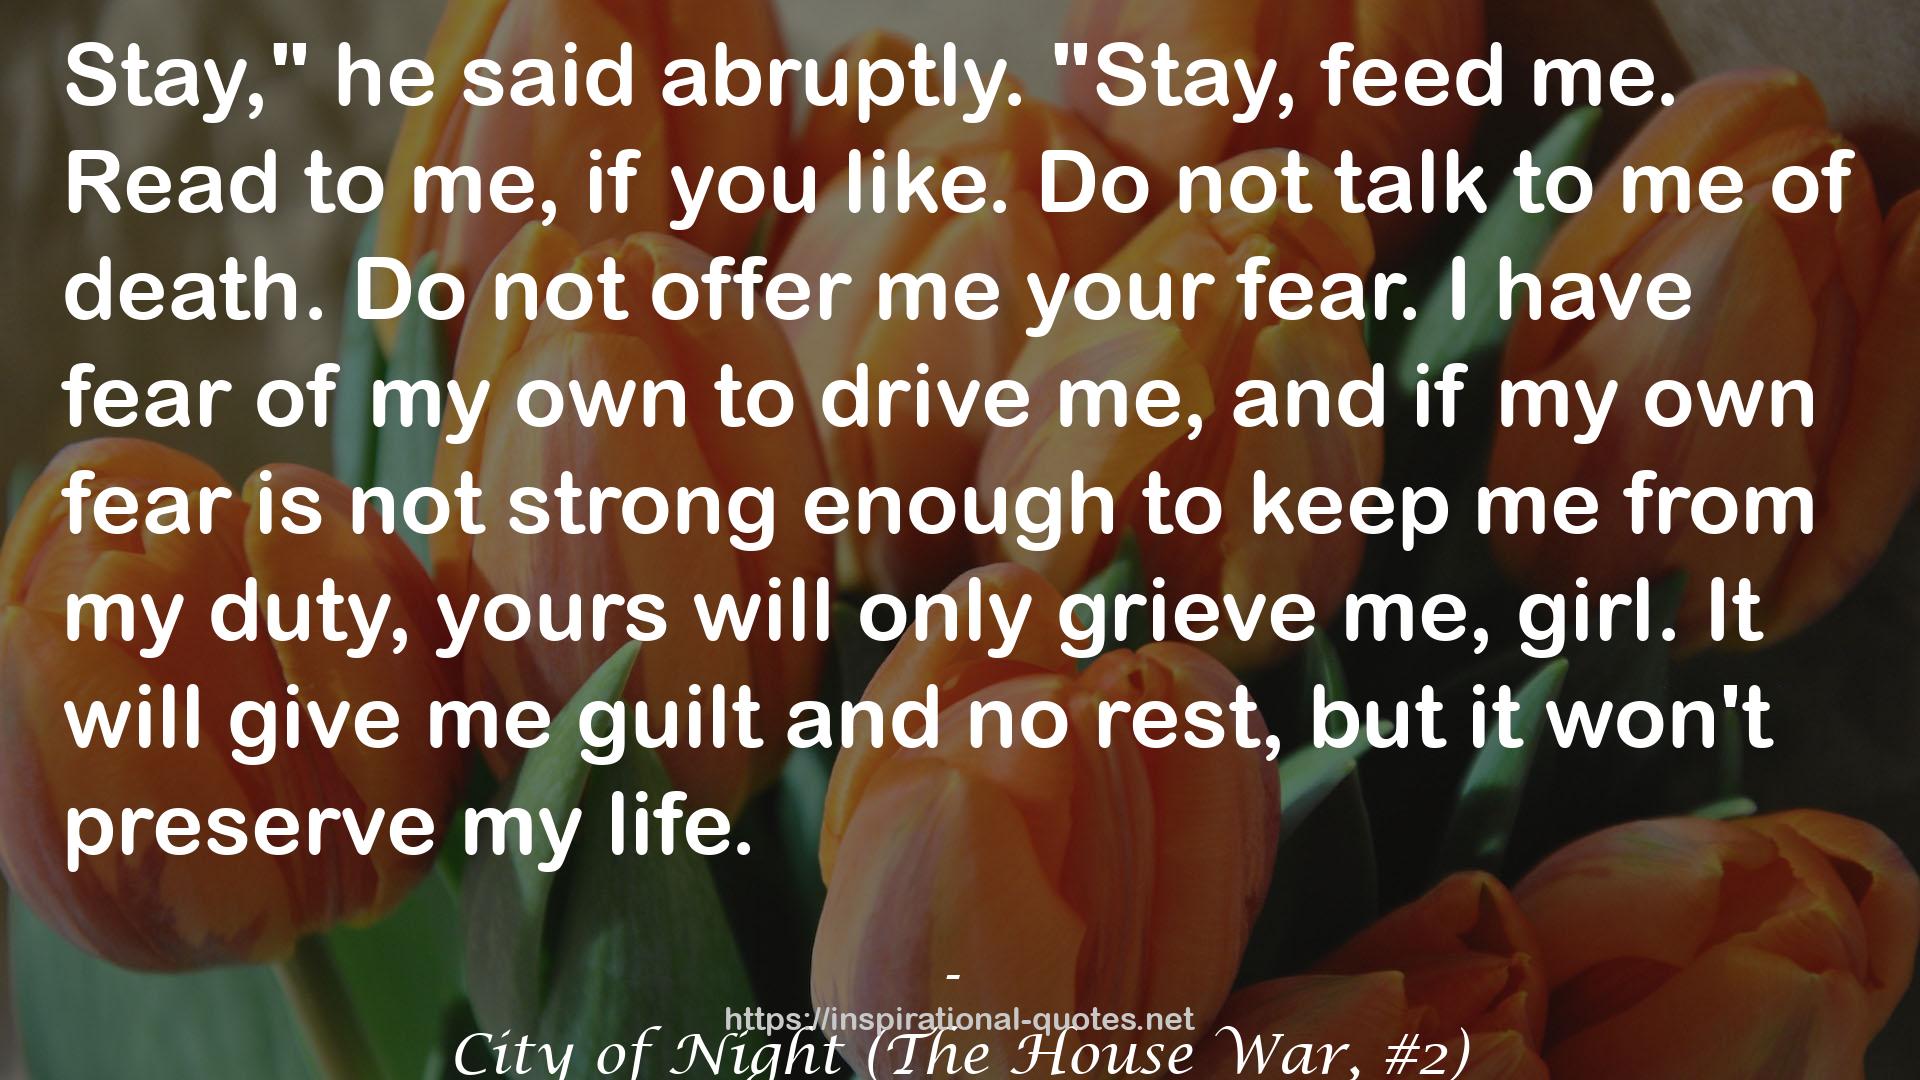 City of Night (The House War, #2) QUOTES